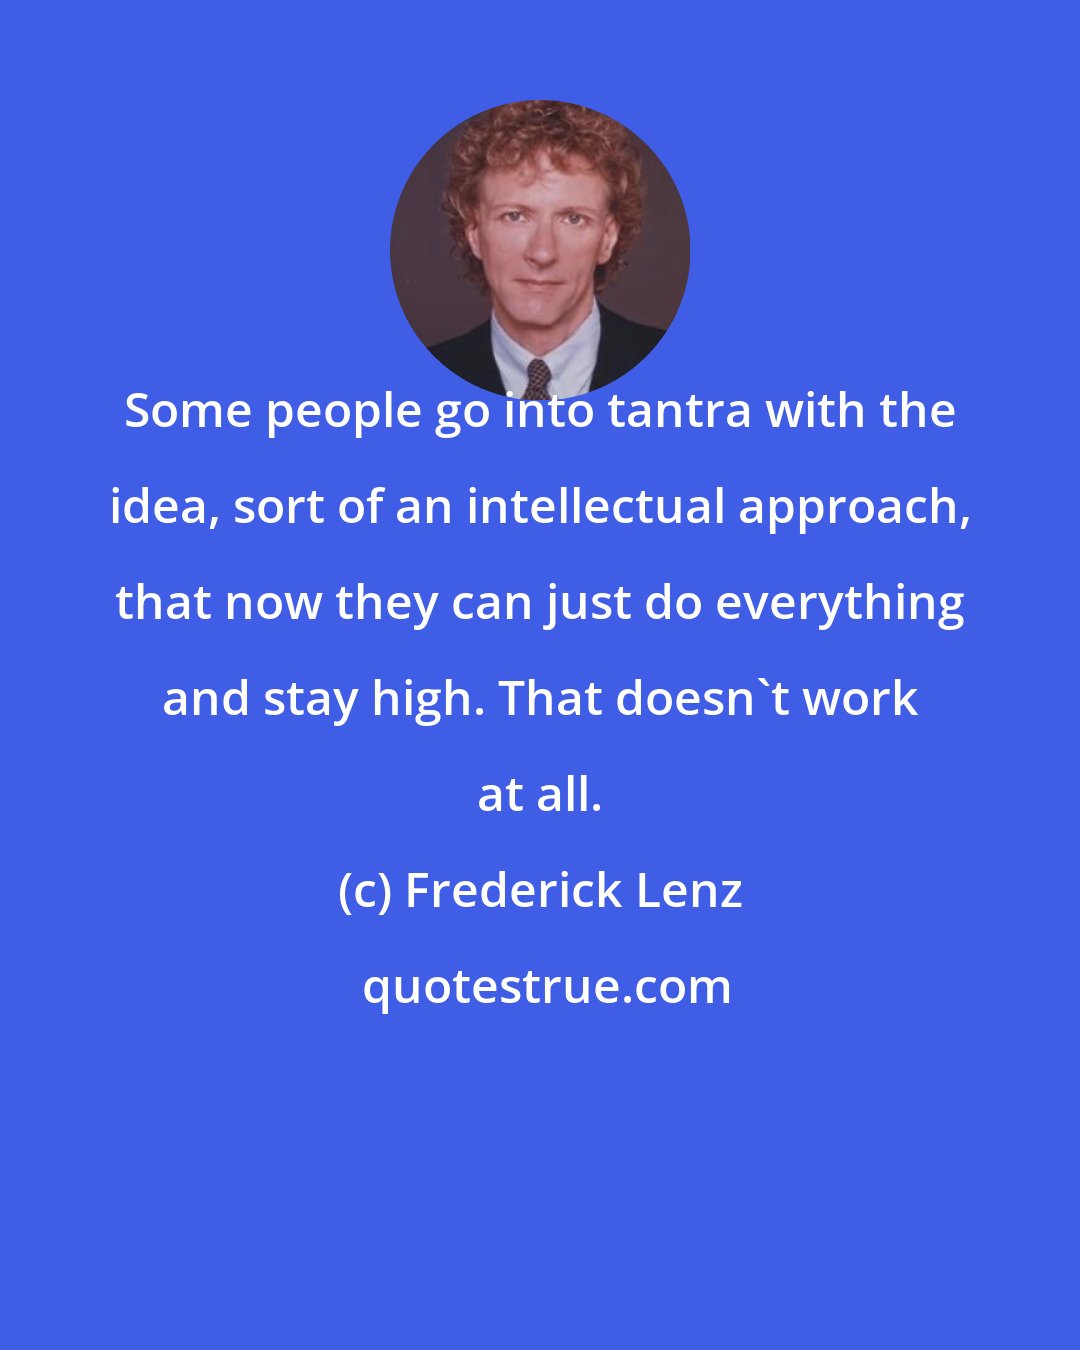 Frederick Lenz: Some people go into tantra with the idea, sort of an intellectual approach, that now they can just do everything and stay high. That doesn't work at all.